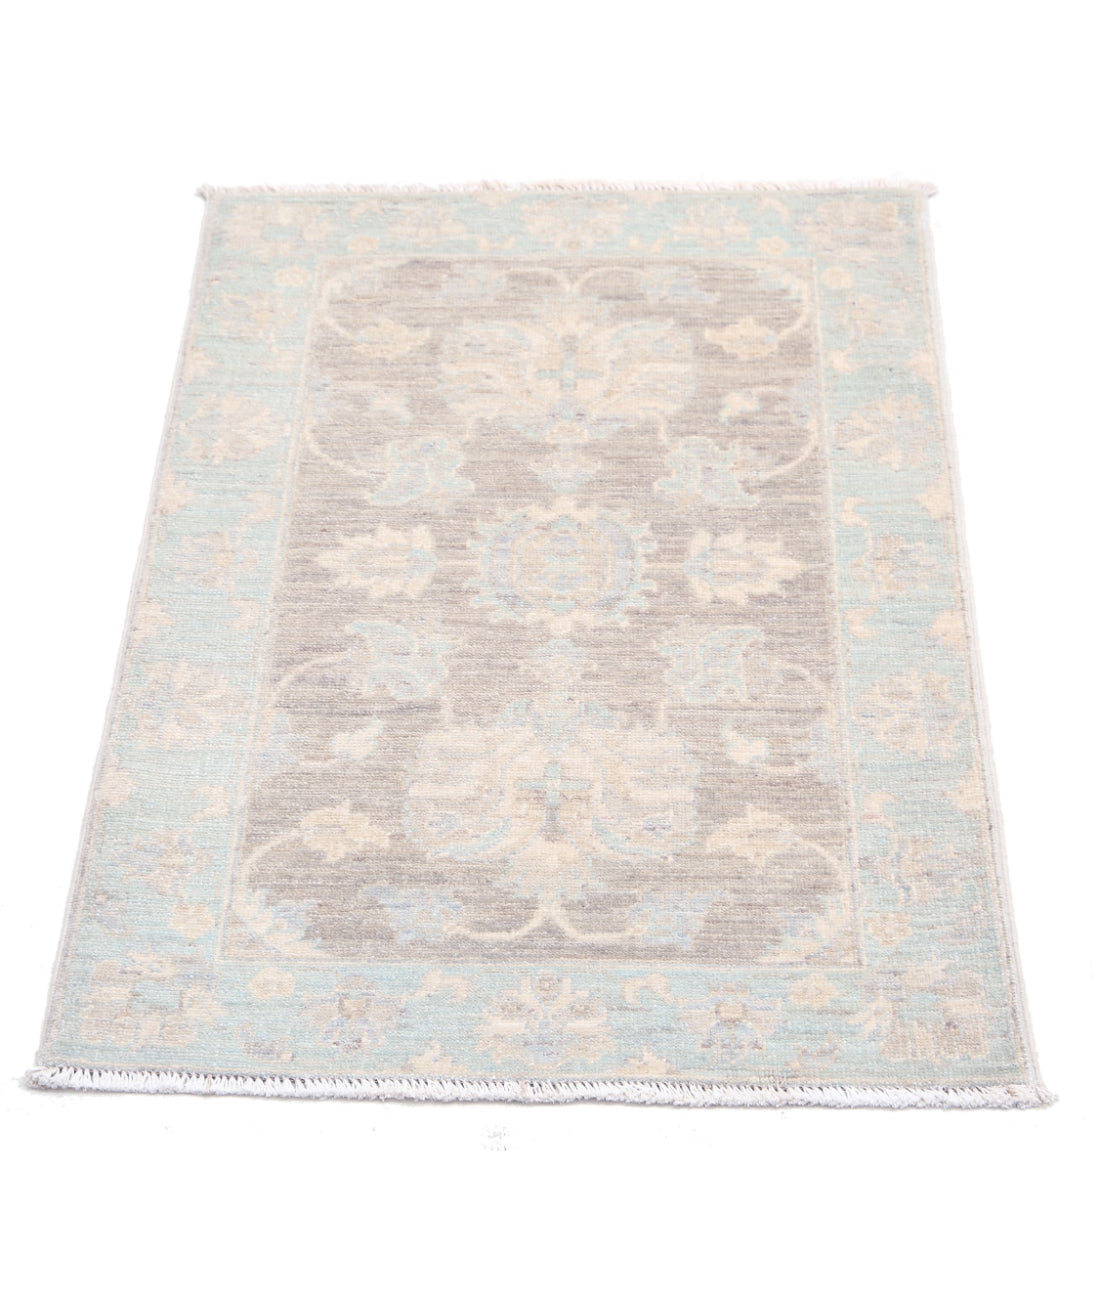 Hand Knotted Serenity Wool Rug - 2'0'' x 3'0'' 2'0'' x 3'0'' (60 X 90) / Brown / Blue